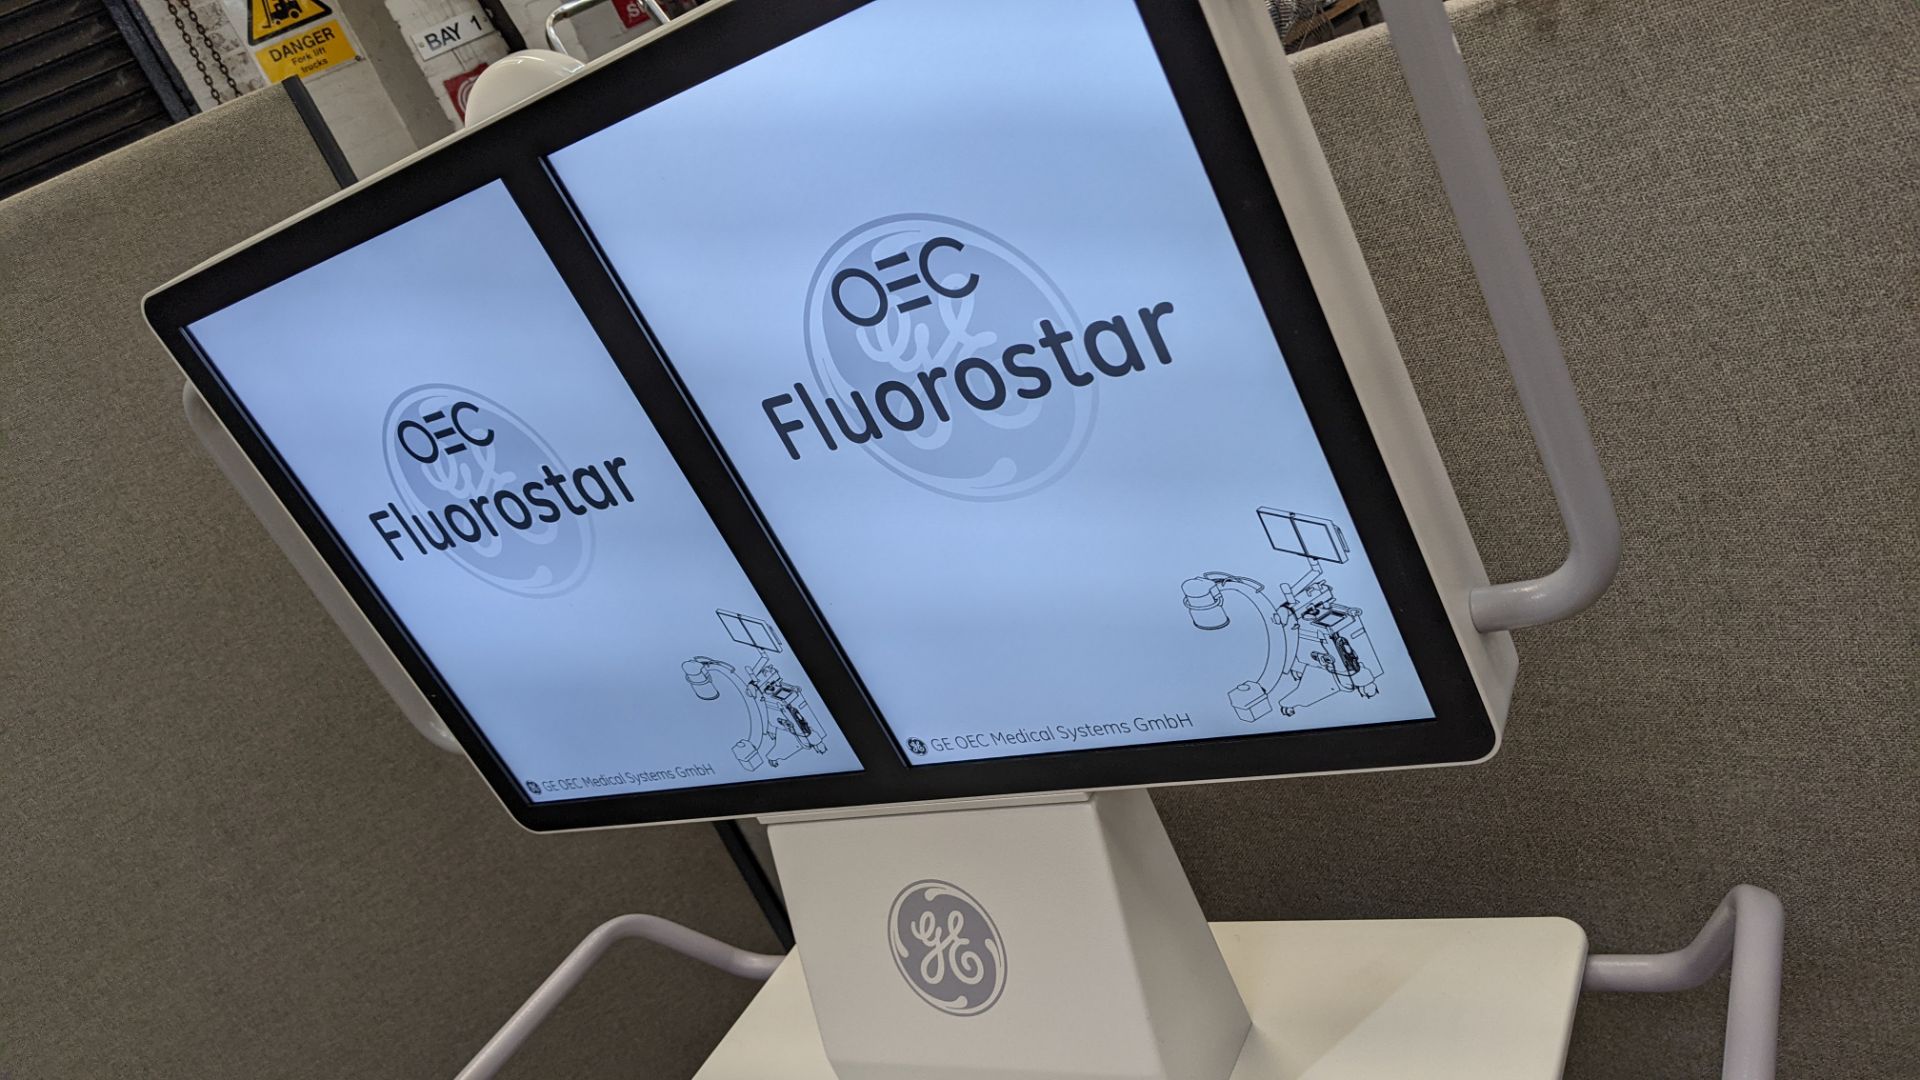 GE-OEC Fluorostar imaging system, purchased new in August 2017. EO4 Series. - Image 45 of 68